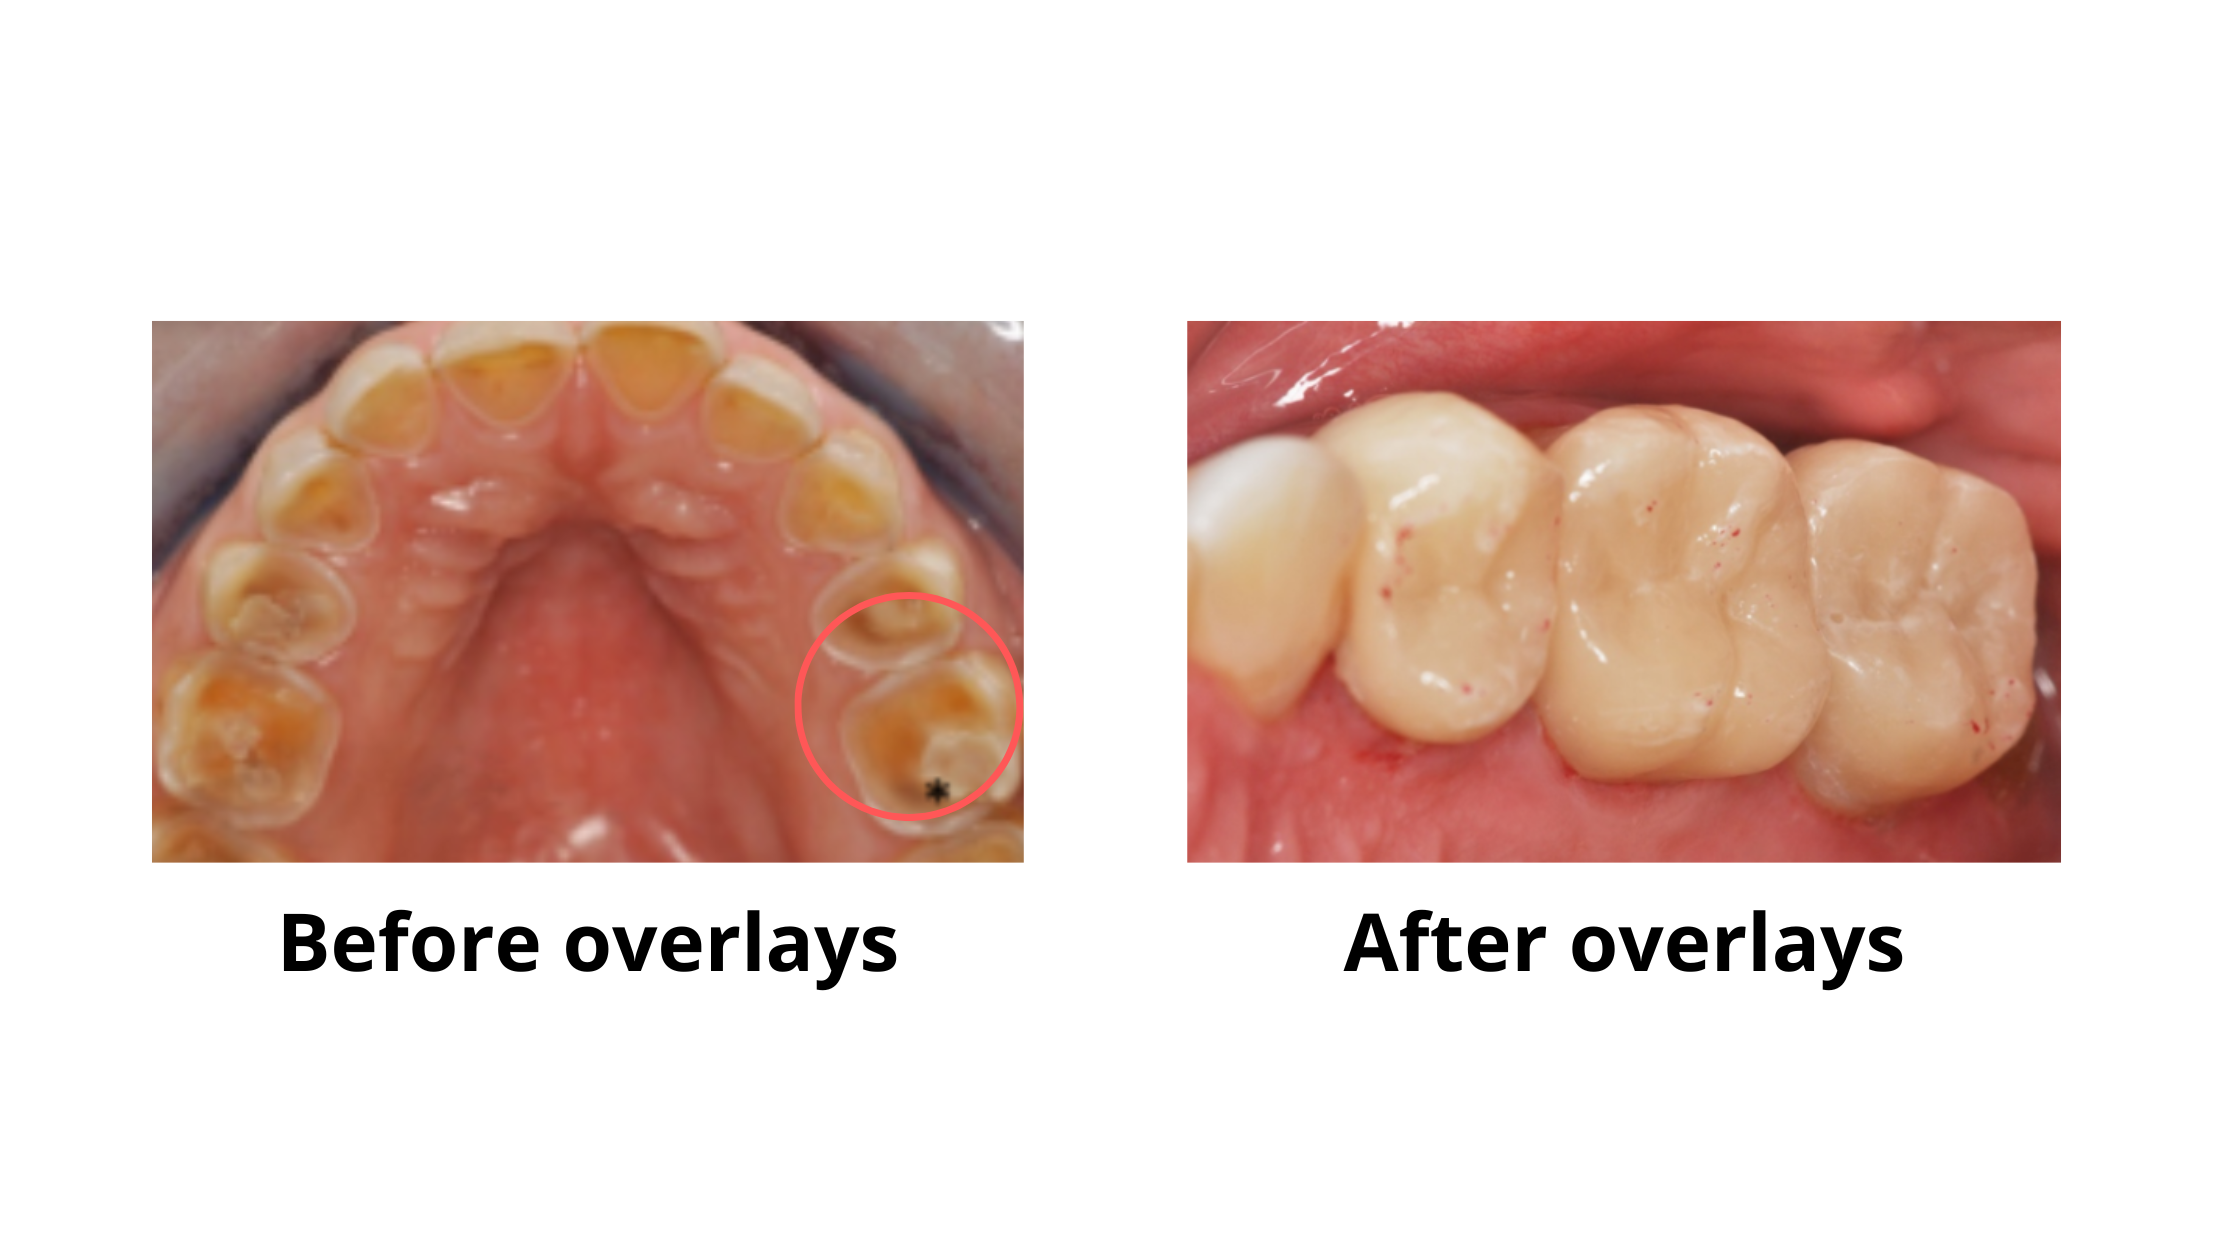 How to Fix Worn Down Teeth - Treatment and Repair - Vancouver